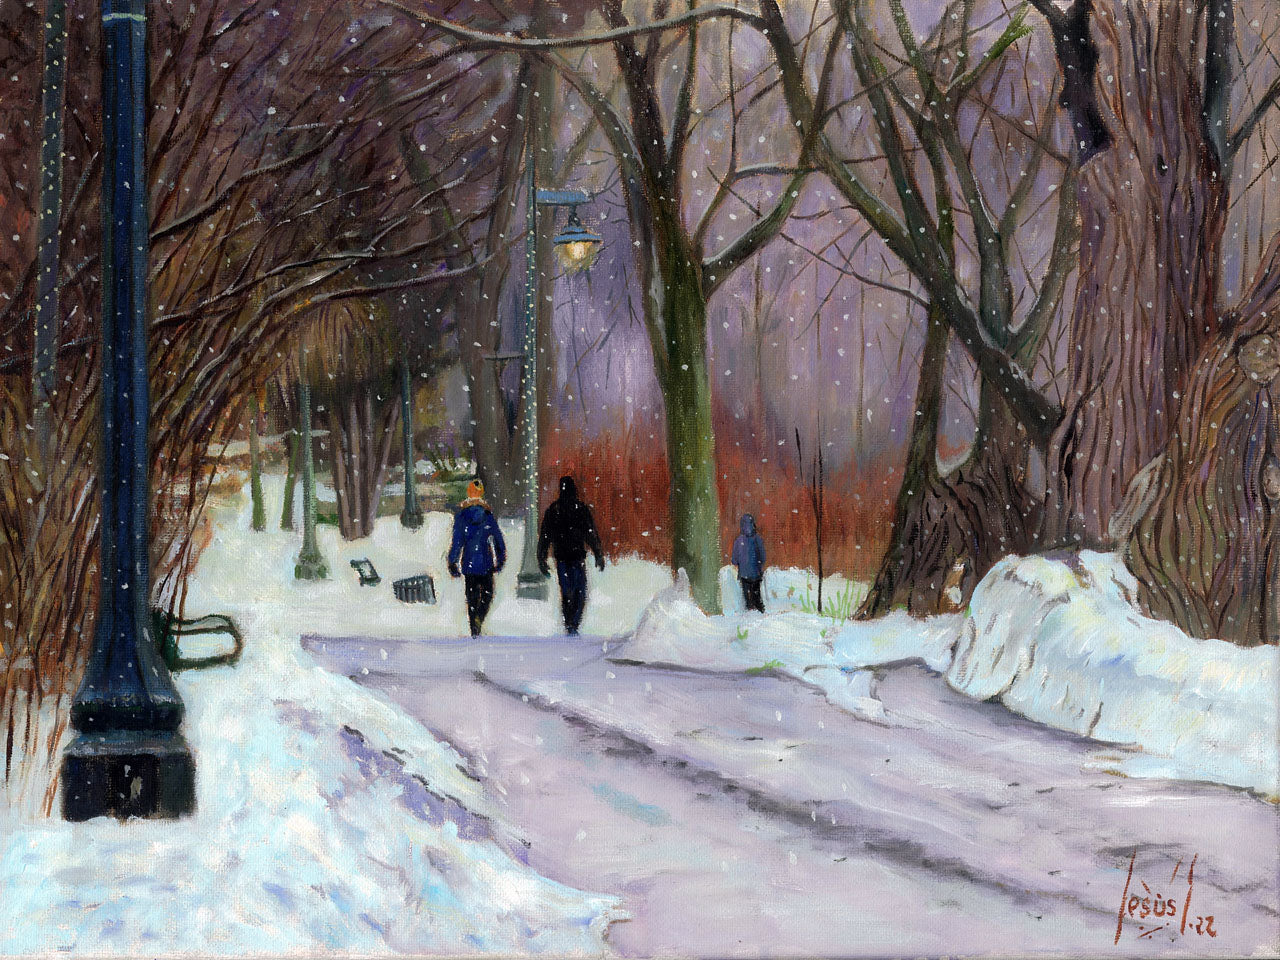 Snowing in the park, original oil painting